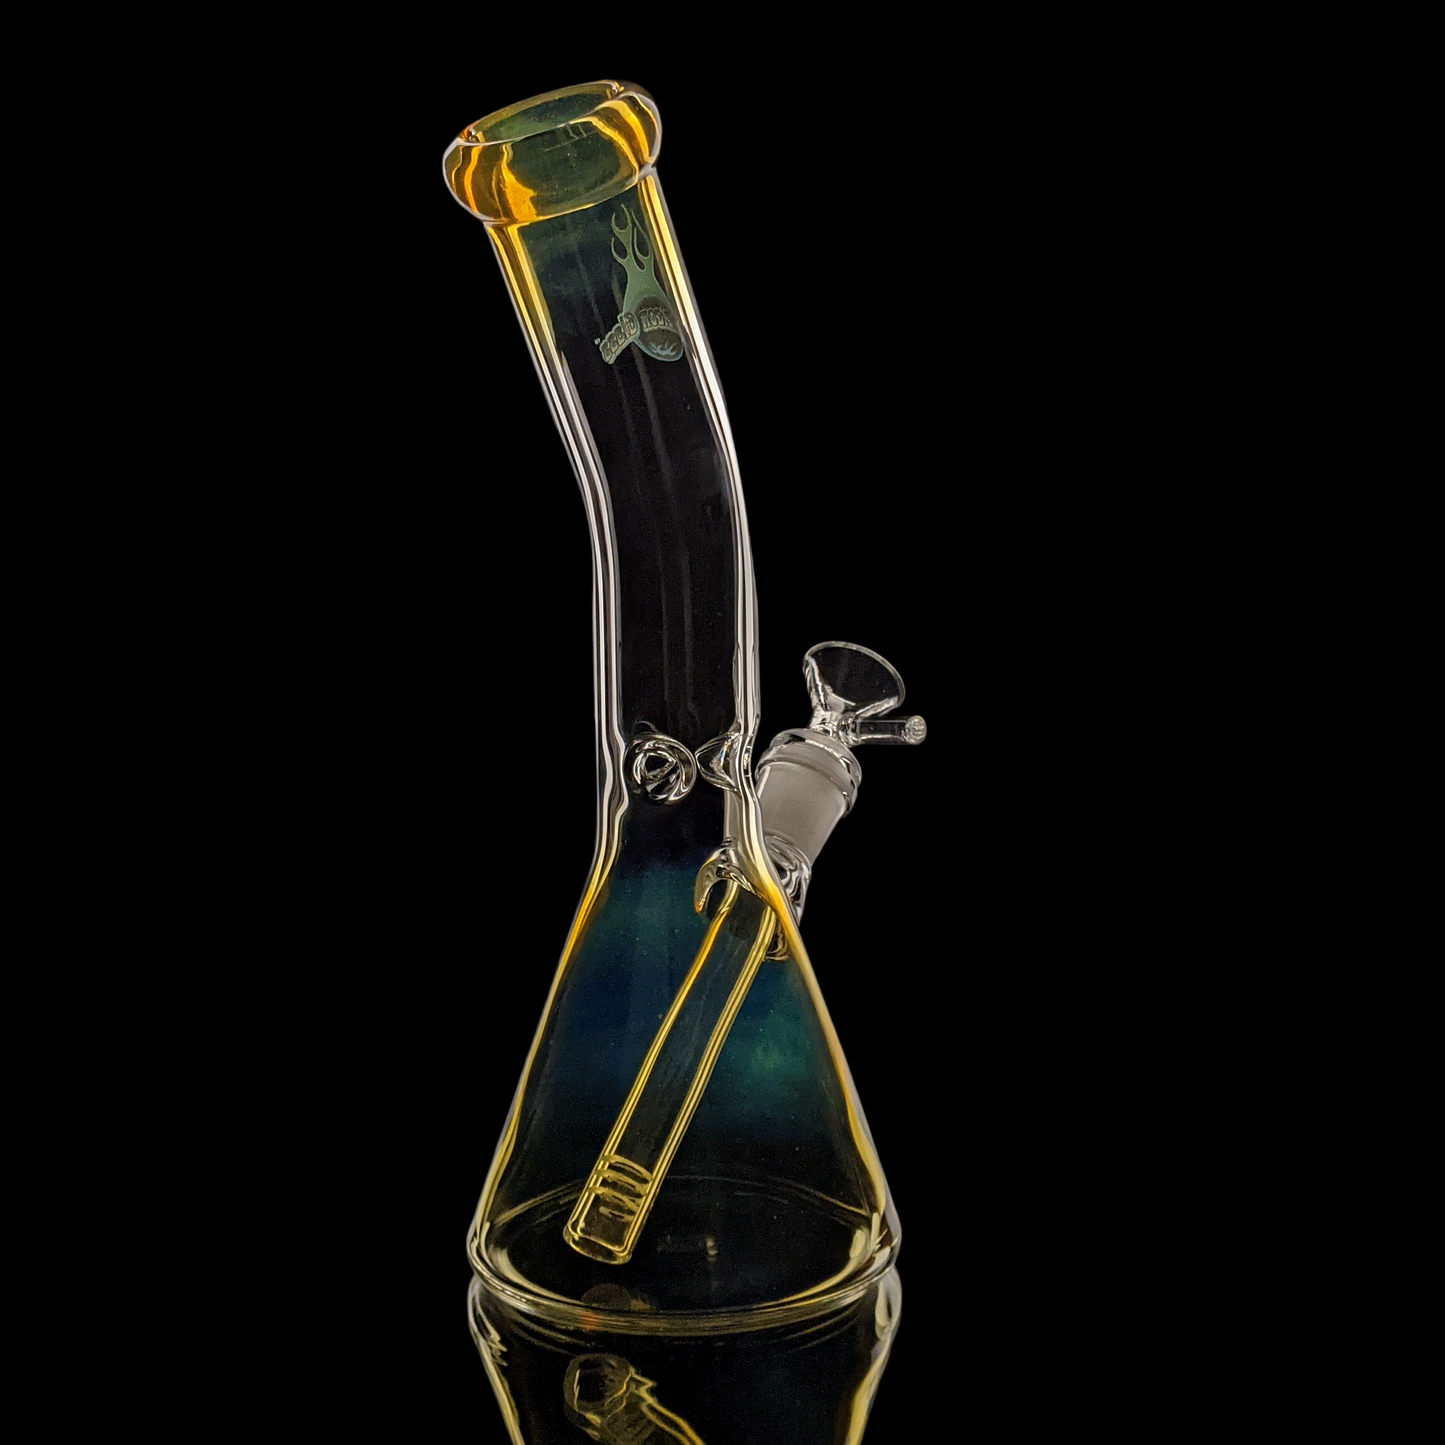 Cambio Series Bent Neck 23cm Color Change Beaker by Chameleon Glass